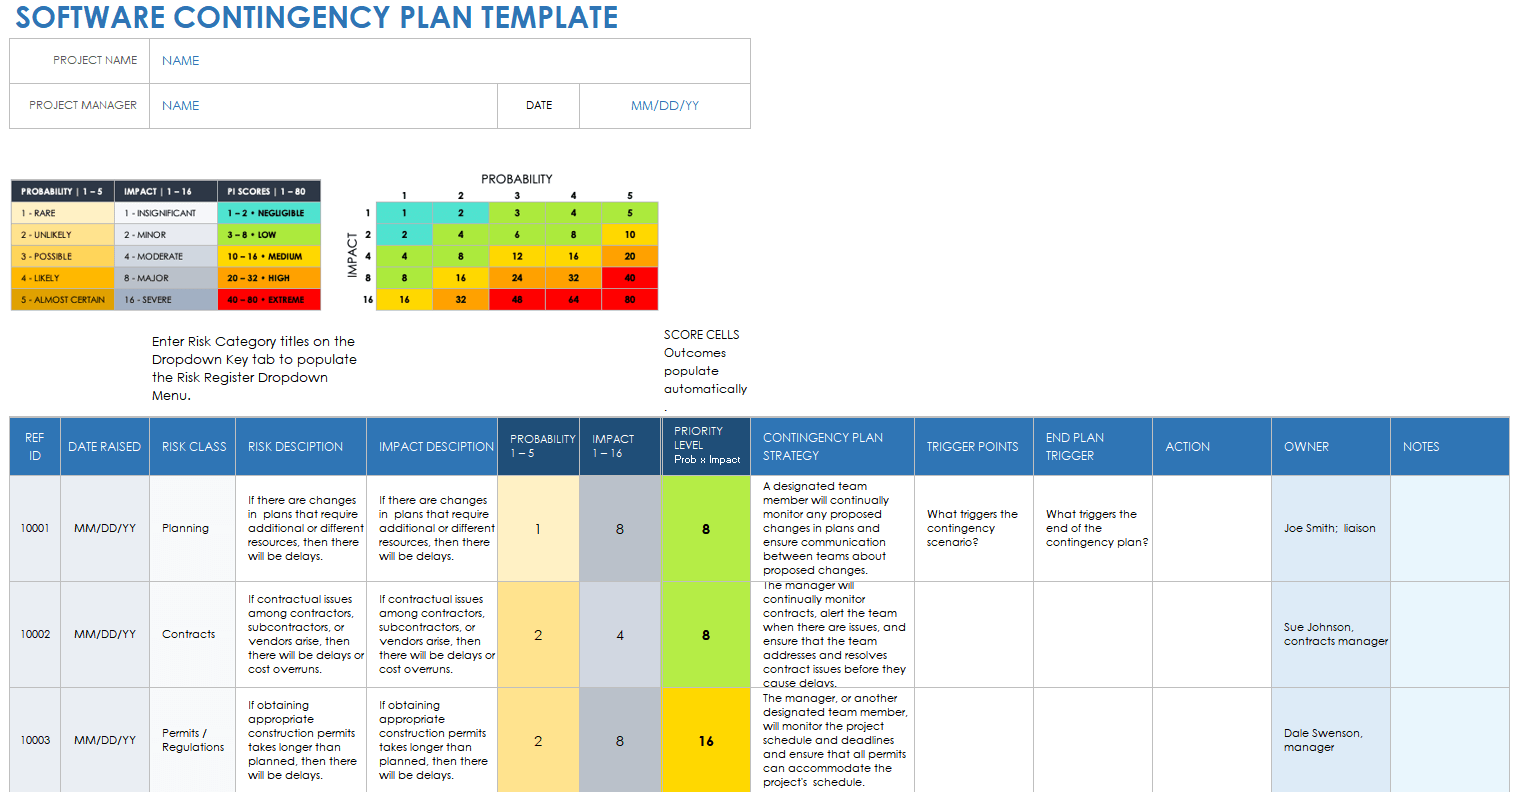 Software Contingency Plan Template